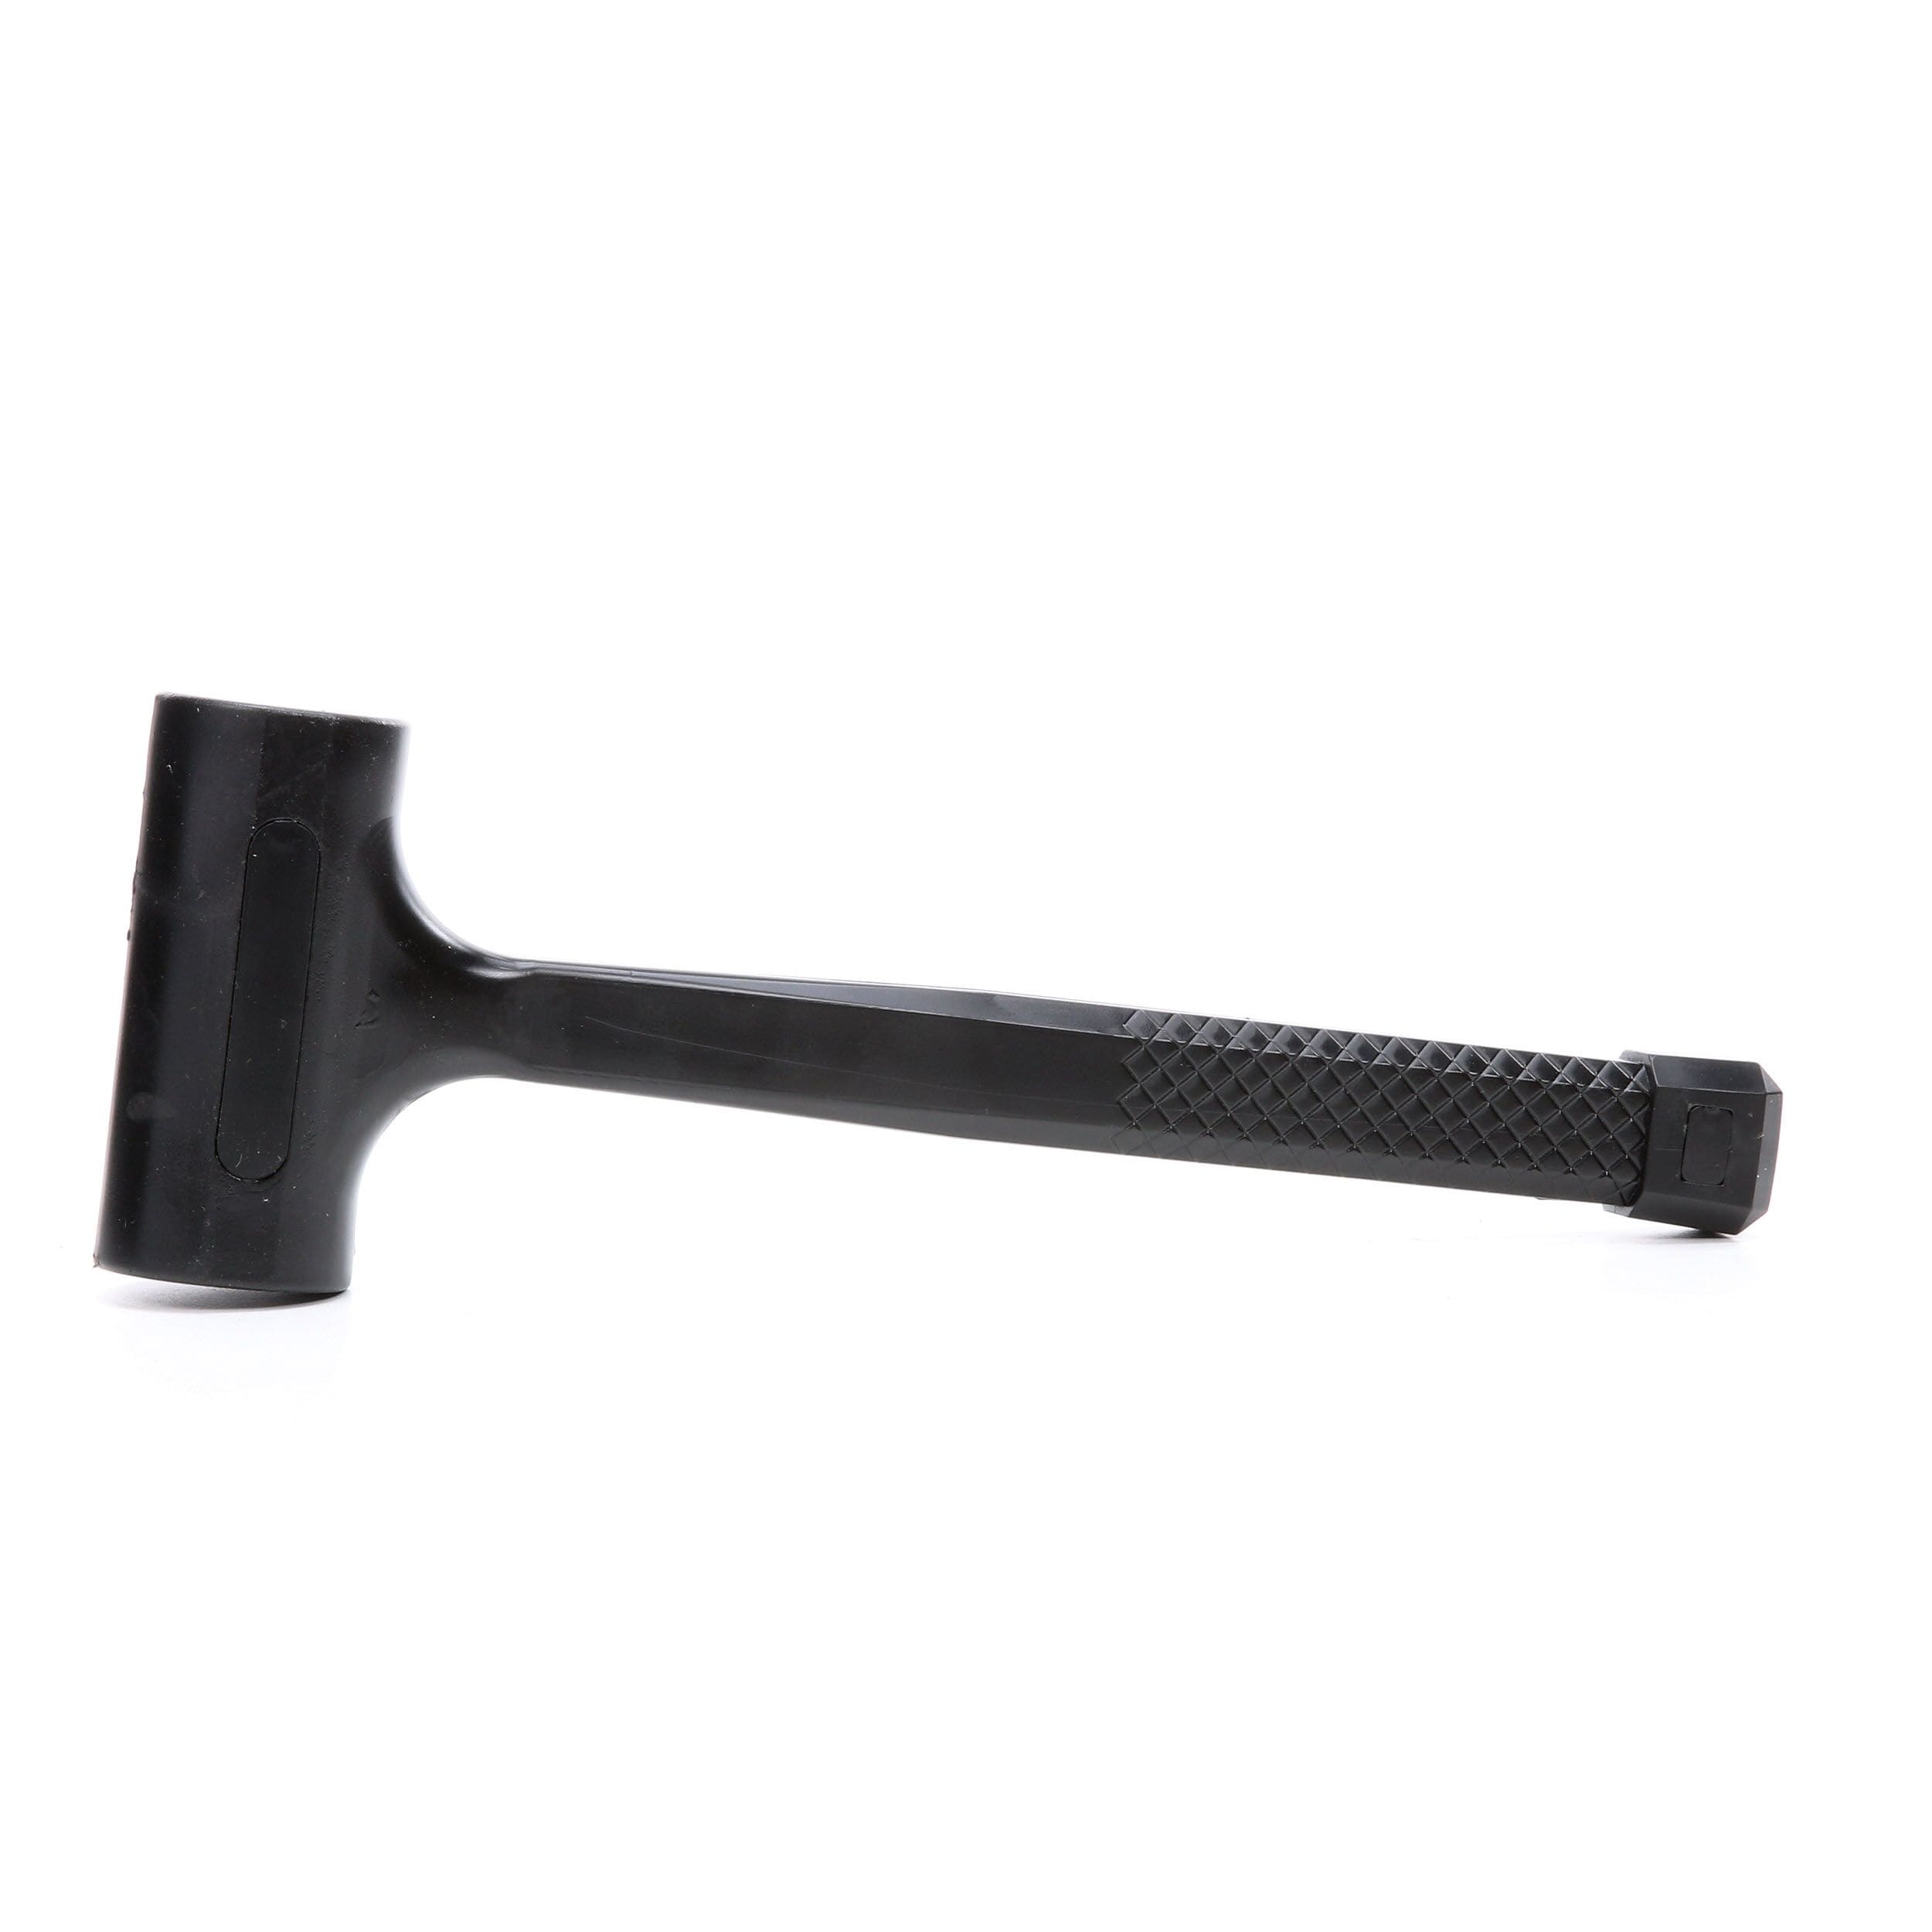 Eastwood 43 oz Flat Face Dead Blow Hammer Polyurethane Coating And Steel  Core